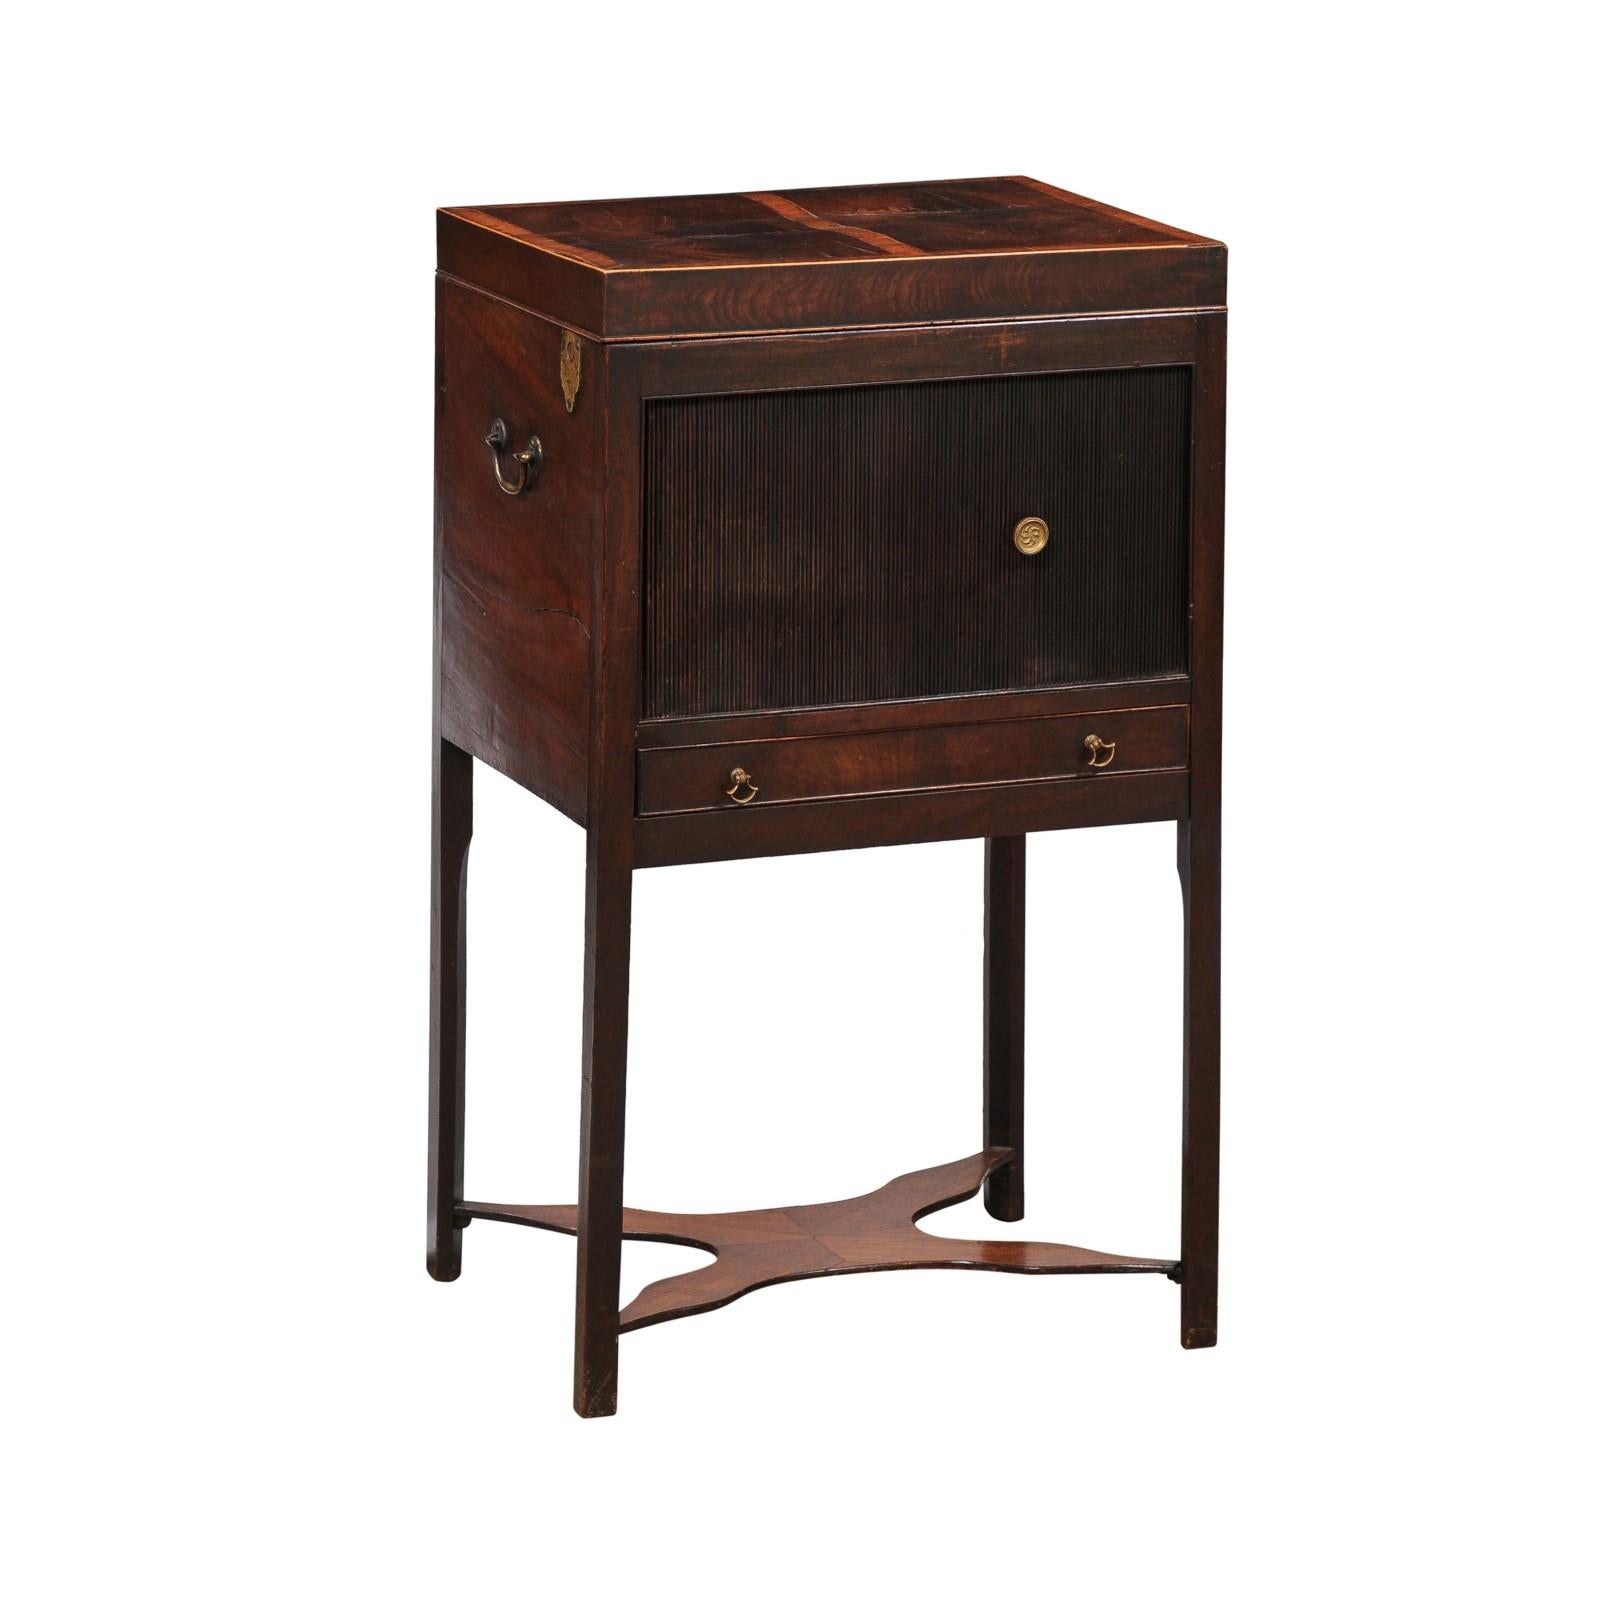 Early 19th Century English Mahogany Side Cabinet with Tamboor Door, Lift Top & Inlay
